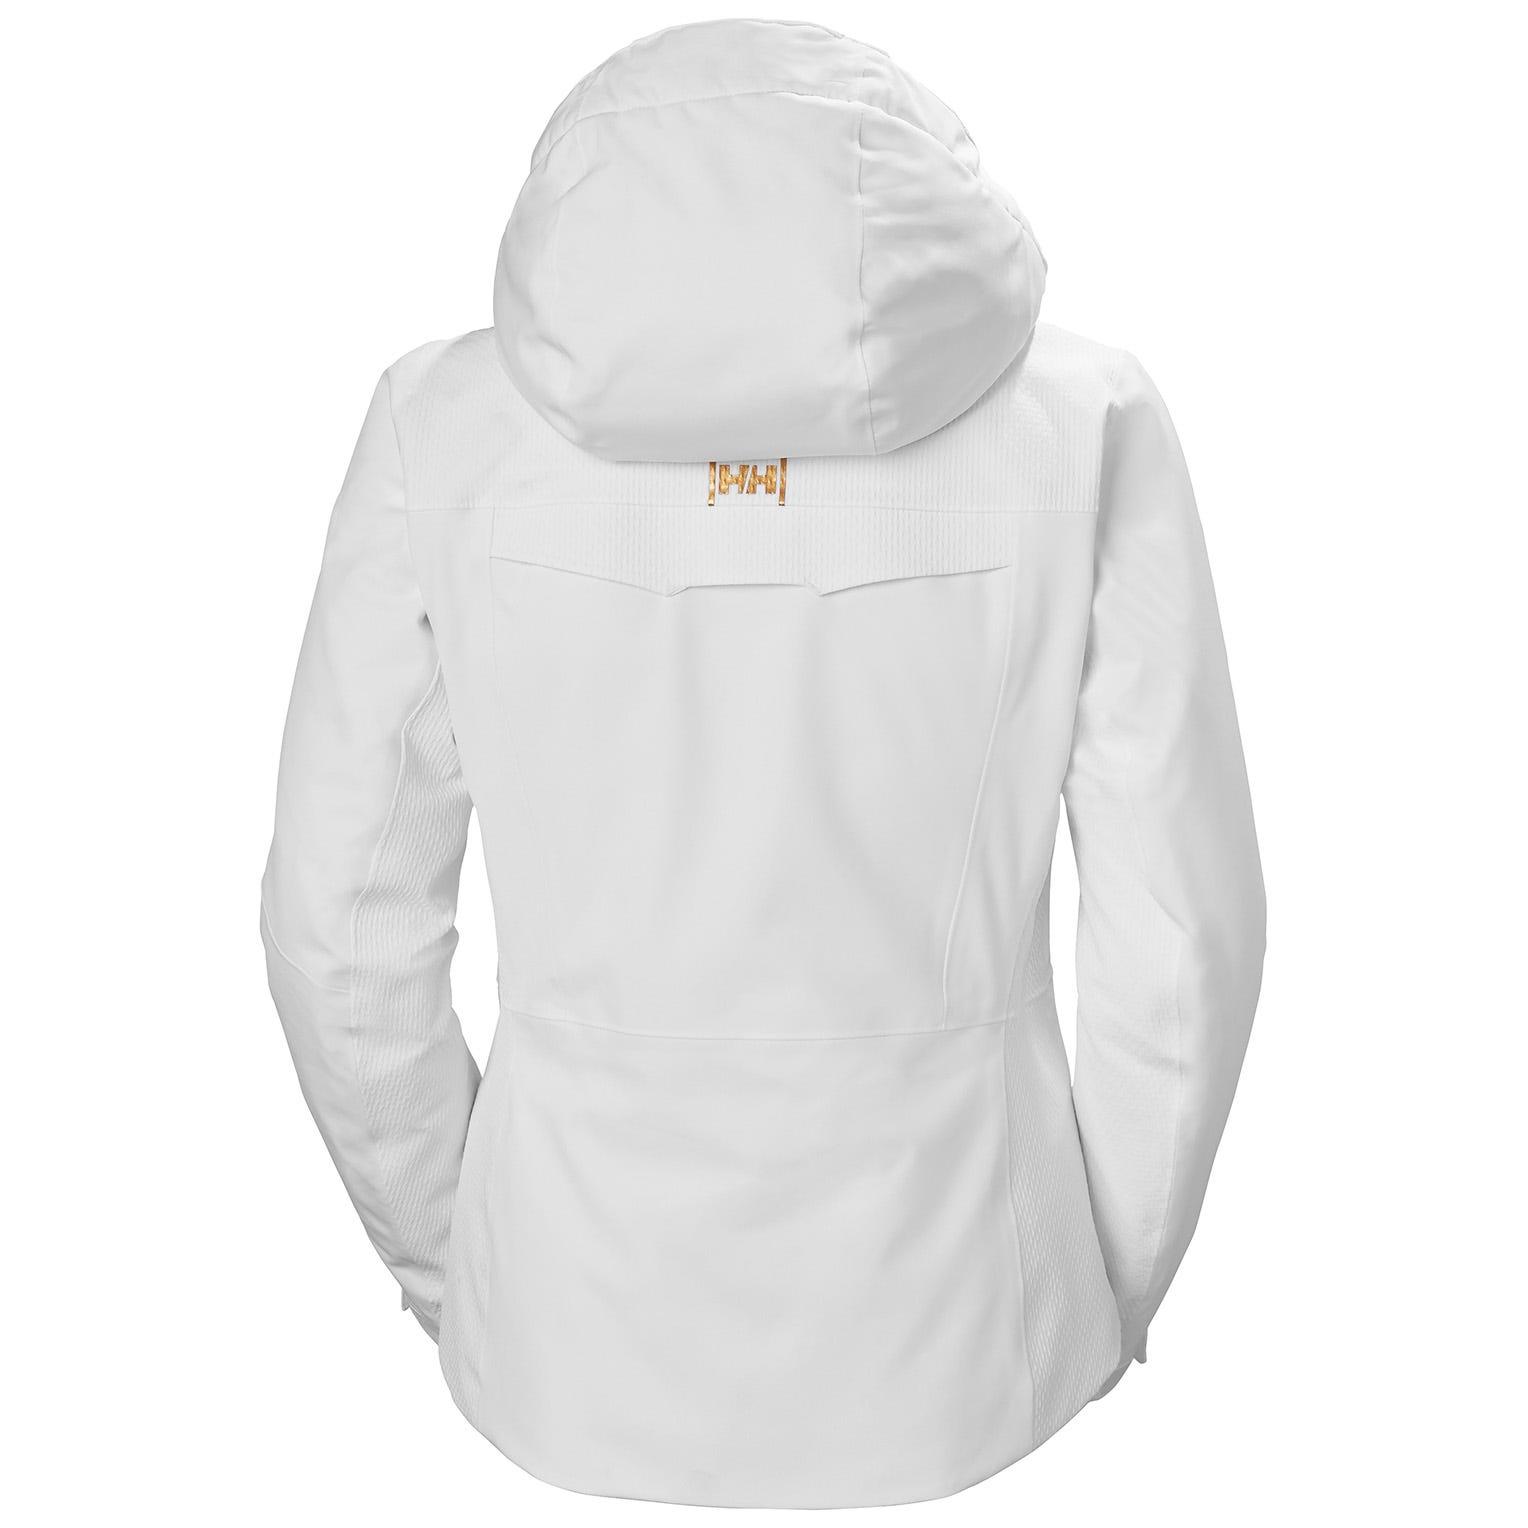 Helly Hansen Synthetic W Pinnacle Jacket in White - Lyst